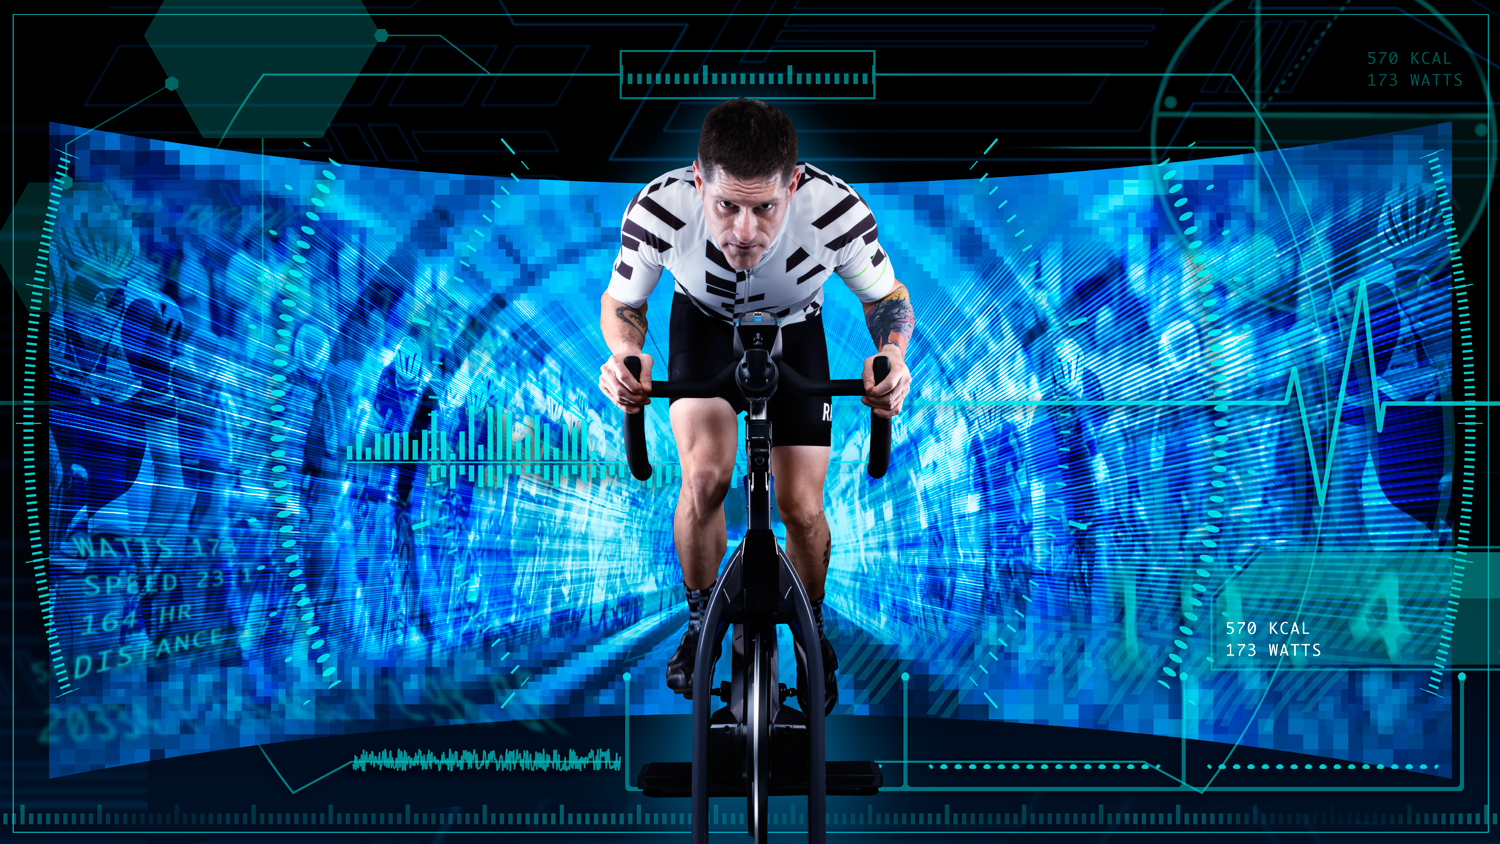 Digital art composite of rider on Stages Cycling stationary bicycle  — Studio 3, Inc.